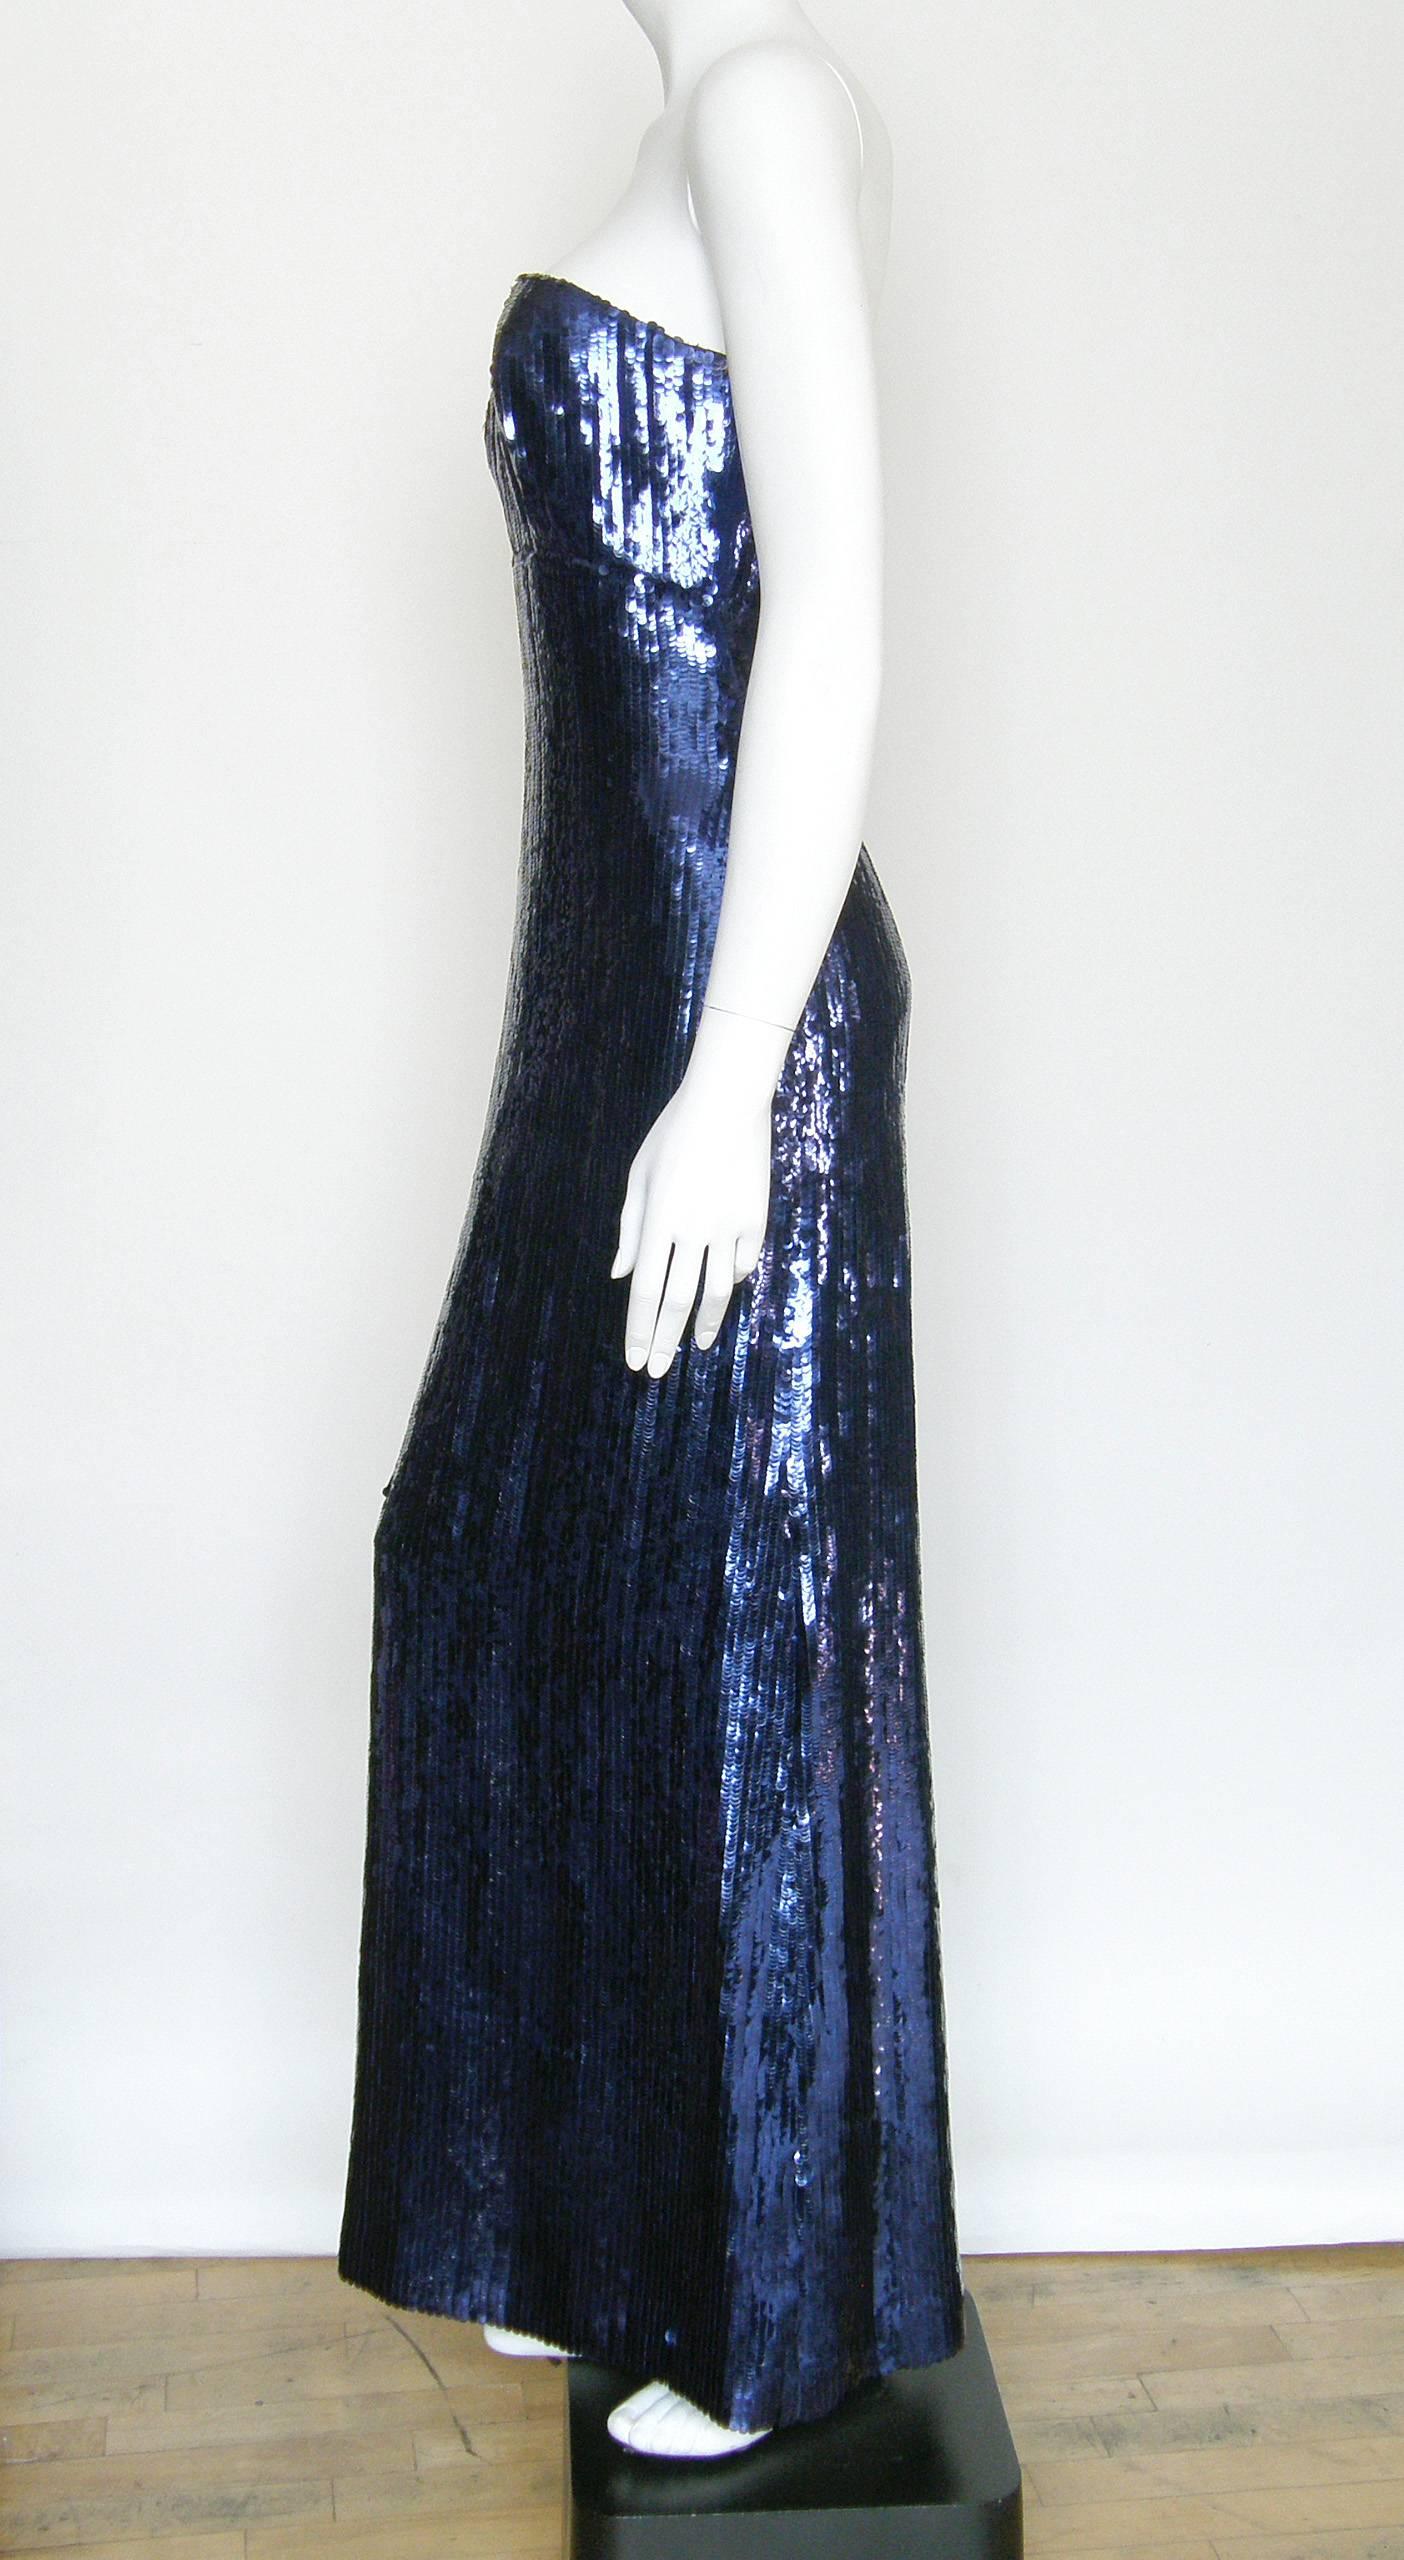 This knock out,  floor length, strapless column dress by Matty Talmack is fully encrusted with blue sequins. It's beautifully constructed with (metal) boned bodice and additional floating/hanging bones between the breasts for extra structure. This